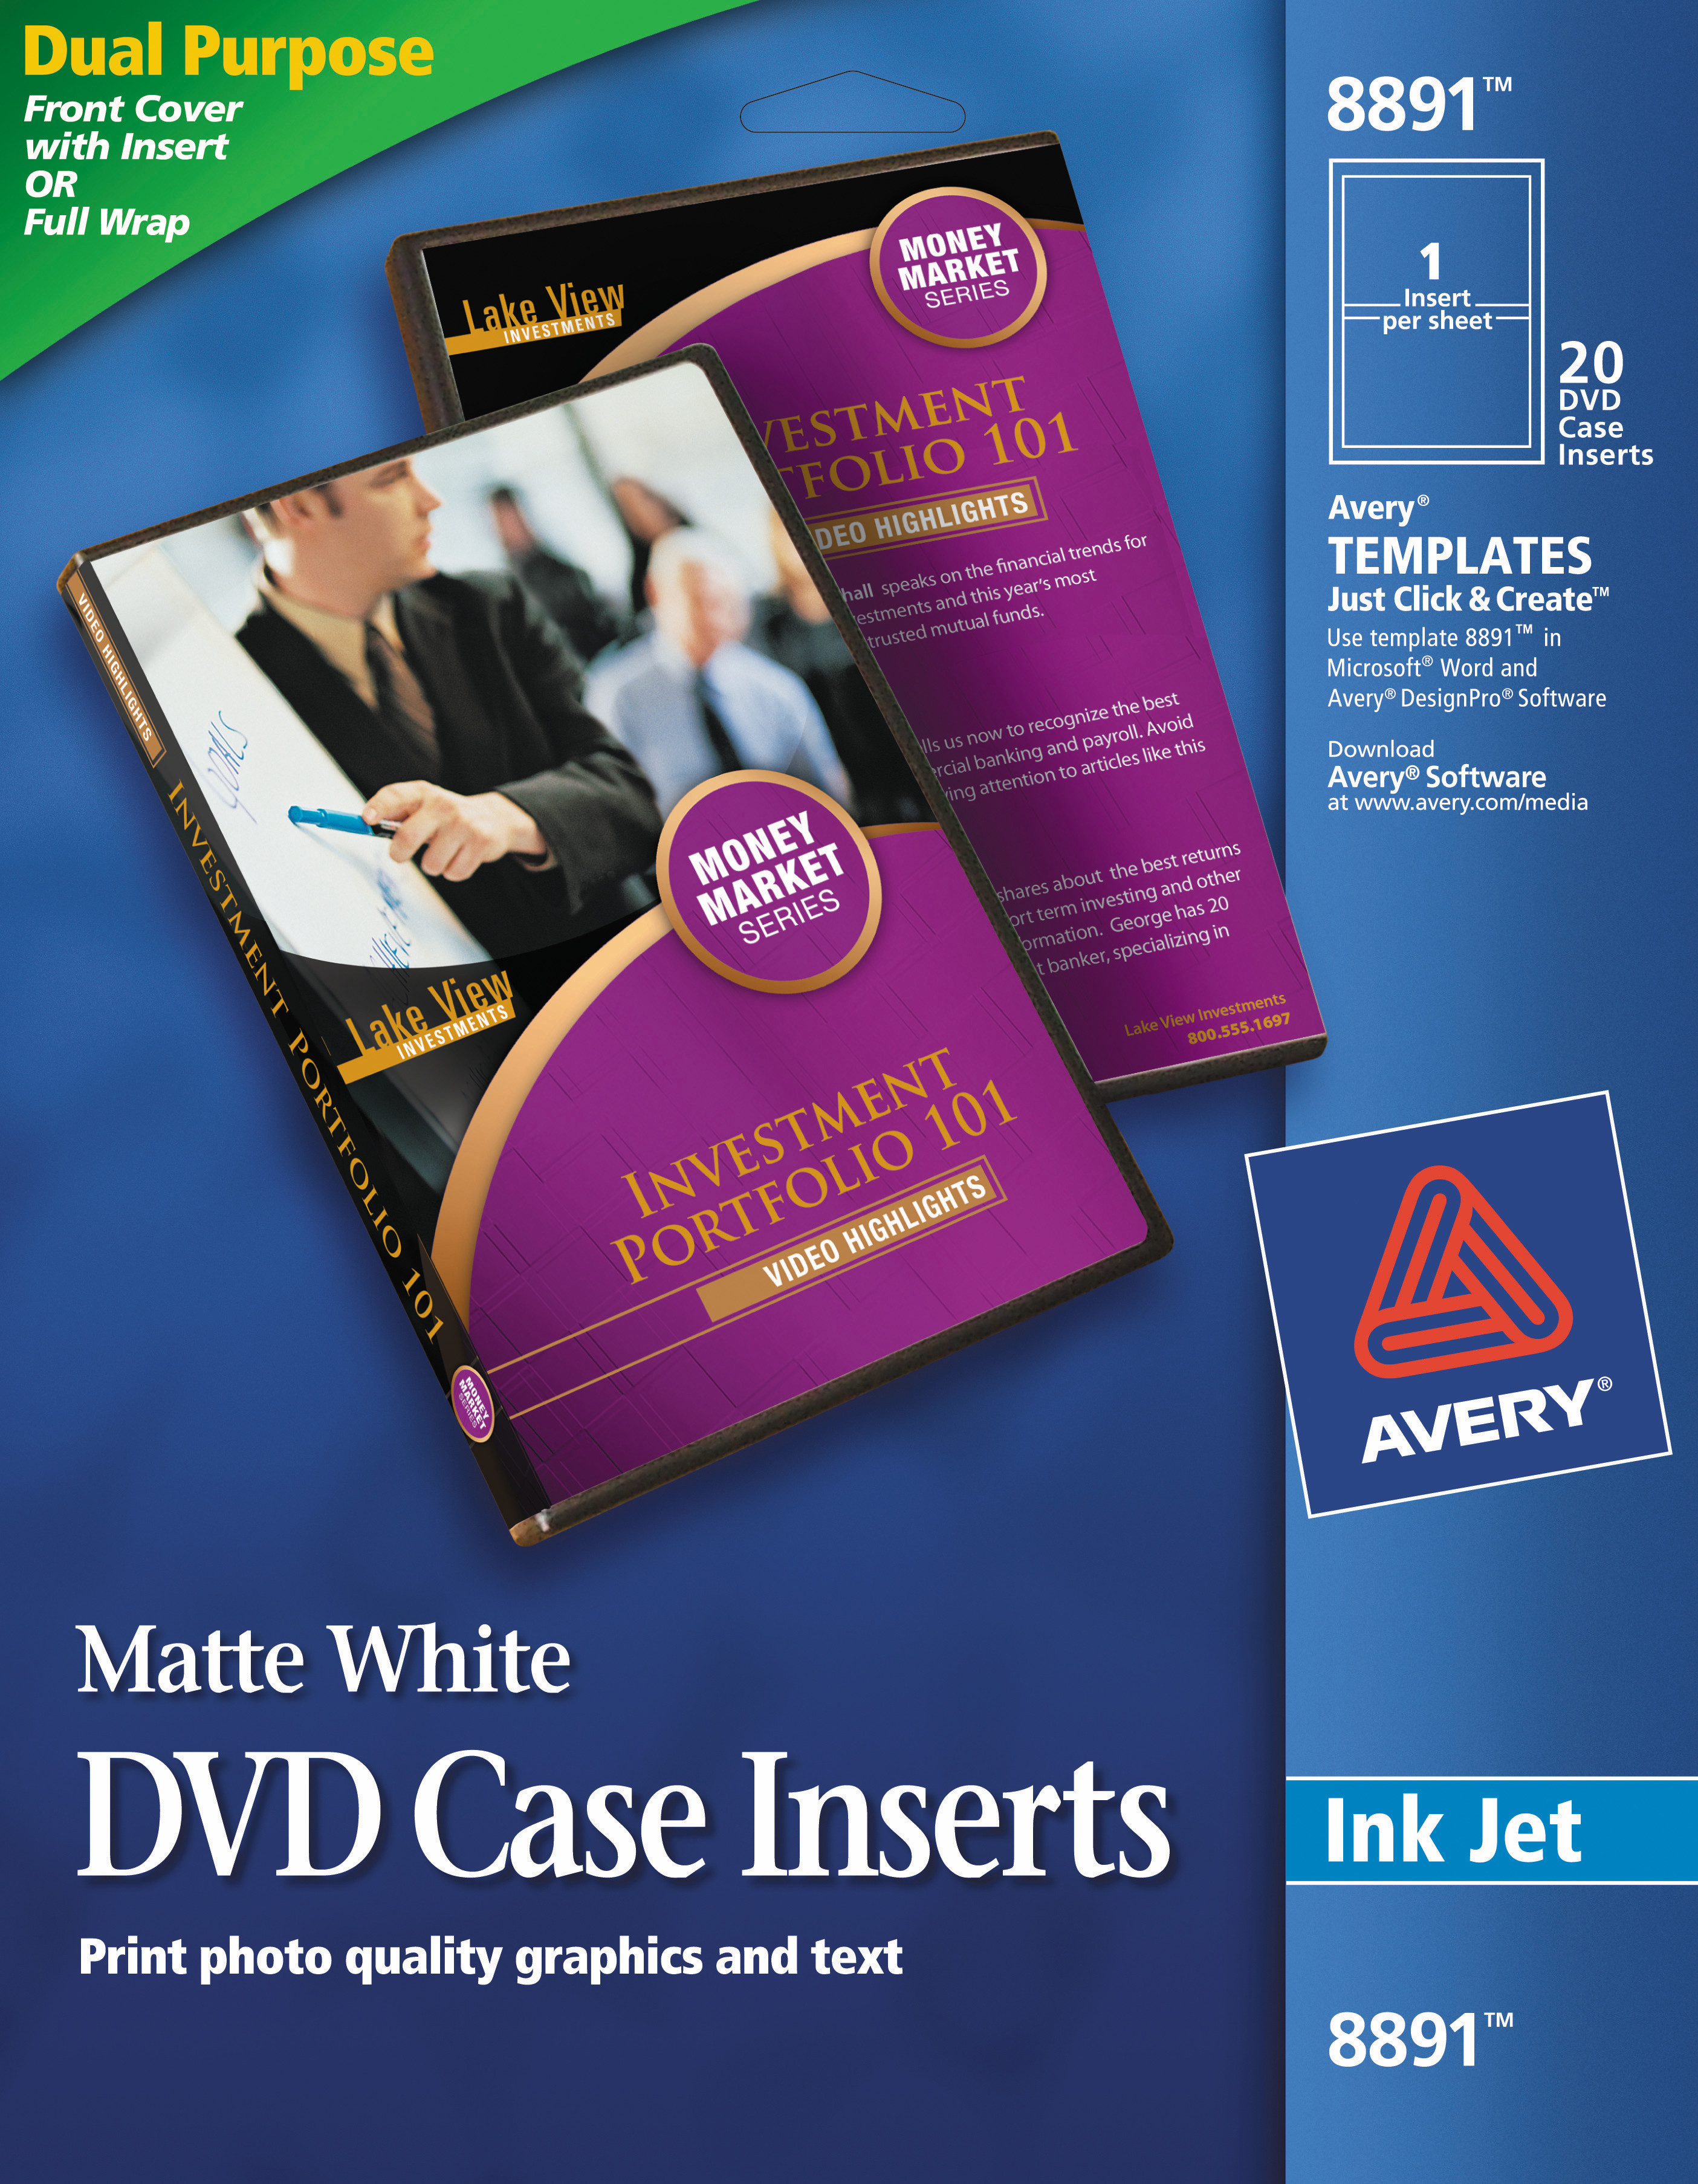 Avery Matte White DVD Case Inserts, 20 Inserts (8891) - image 1 of 3